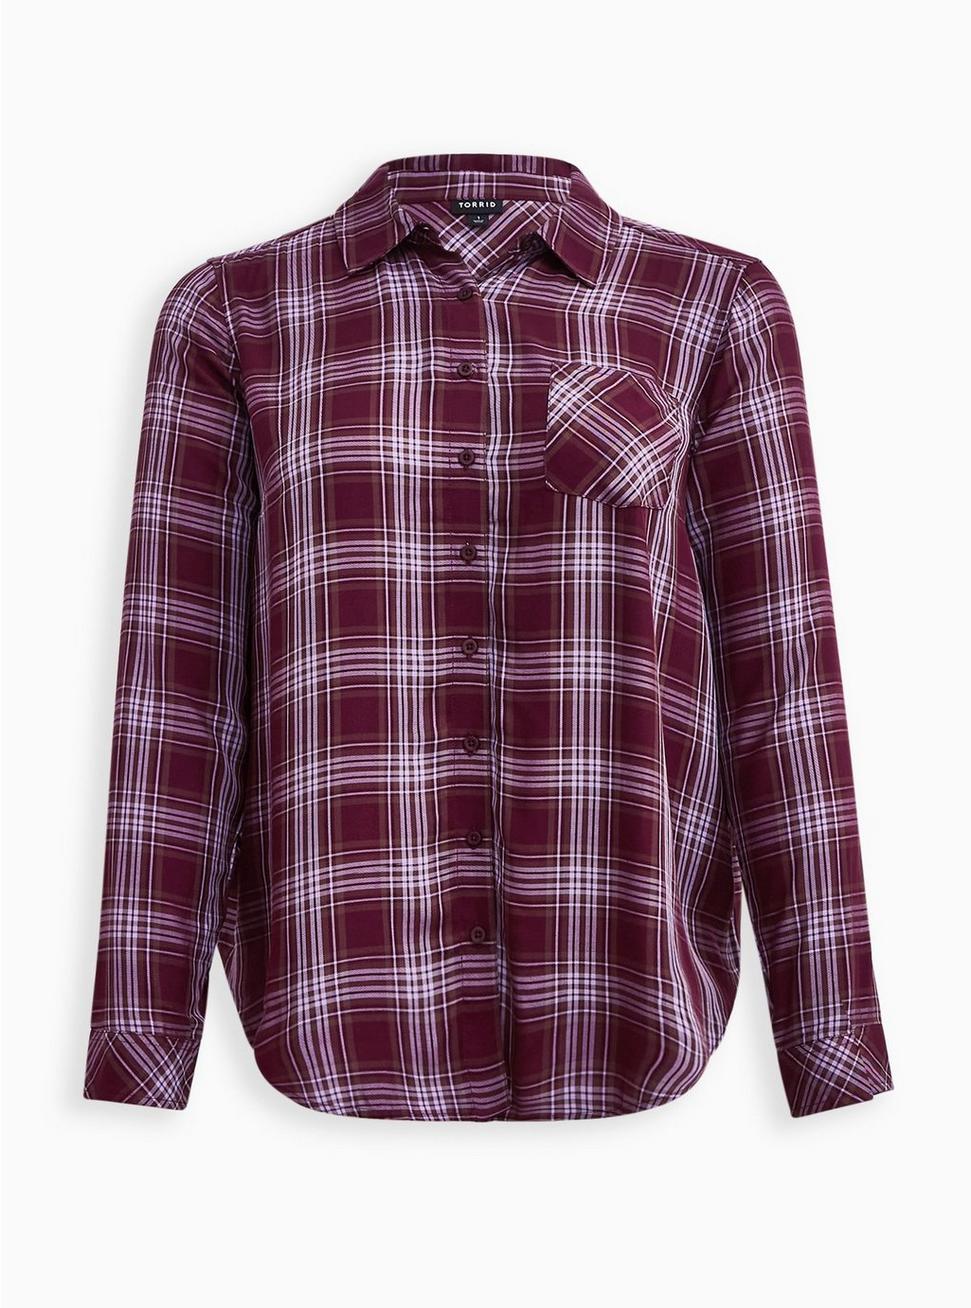 Lizzie Rayon Twill Button-Up Long Sleeve Shirt, BUNDLE UP PLAID, hi-res